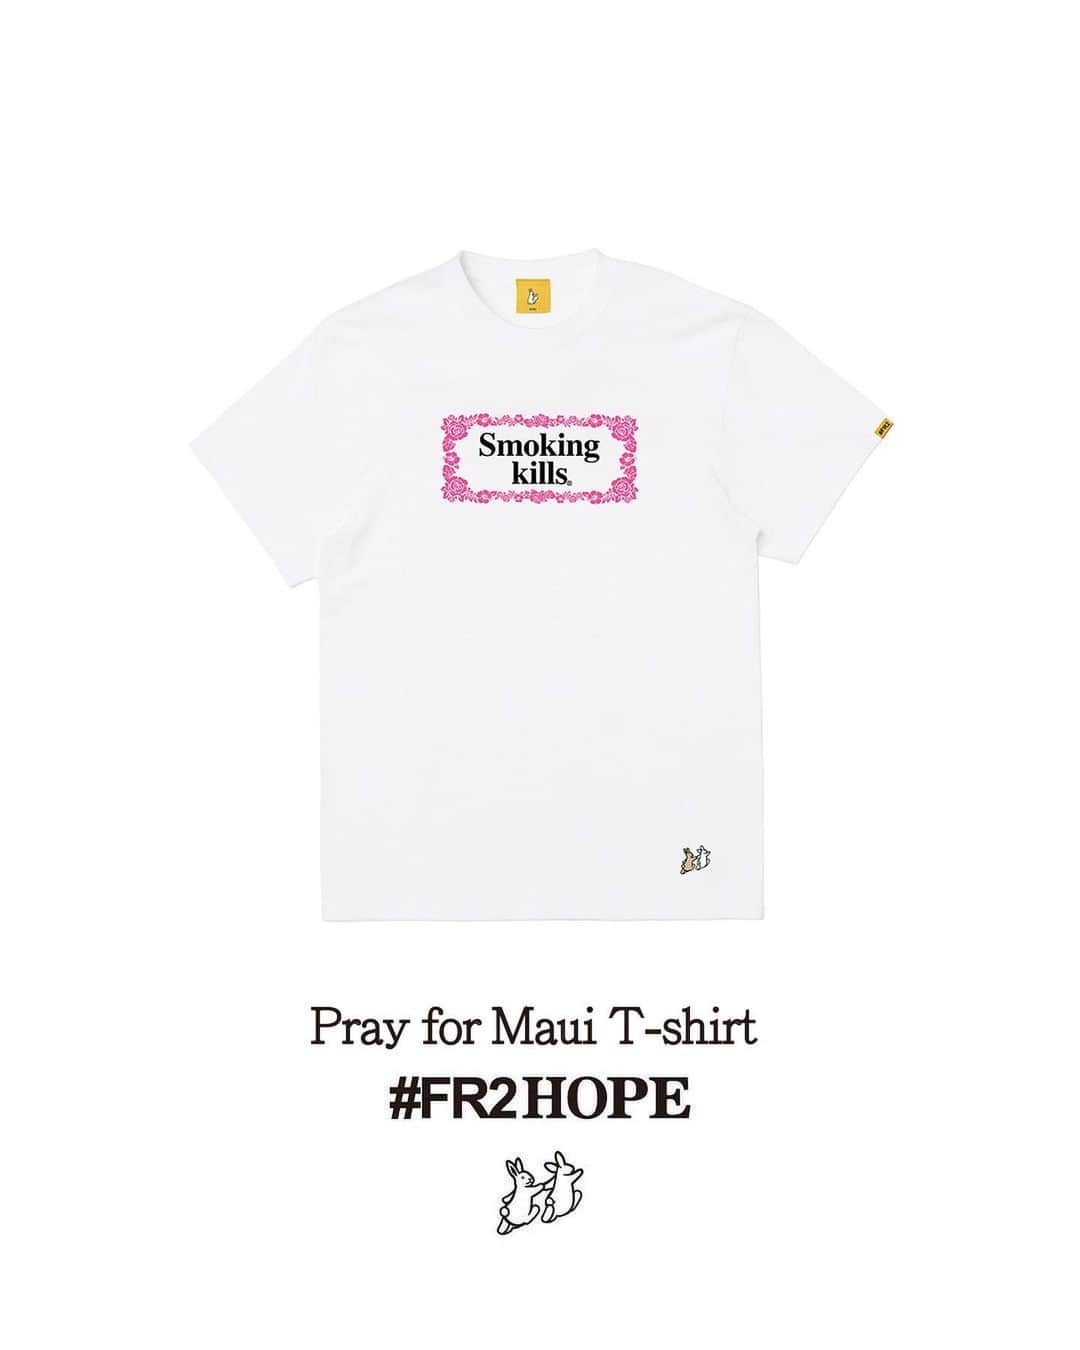 #FR2さんのインスタグラム写真 - (#FR2Instagram)「Pray for Maui Island.  As a #FR2 hope project, we will support the disaster that occurred in Maui, Hawaii on August 8th. Starting today, we will start accepting orders at the #FR2 Online Store. All of the sales of the products minus the costs involved in the production of this project will be donated to the Maui Strong Foundation.  Order period: August 13th (Sun) to 19th (Sat), 2023  #FR2希望 プロジェクトとして、8月8日にハワイ・マウイ島で発生した災害への支援を行います。 本日から #FR2 Online Storeで受注販売を開始いたします。 こちらの企画の制作にかかわるコストを引いた商品の売上の全ては、マウイストロング基金に寄付します。  受注期間：2023年8月13日（日）～19日（土）  作为 #FR2 希望项目，我们将支持 8 月 8 日在夏威夷毛伊岛发生的灾难。 从今天开始，我们将开始在 #FR2 在线商店接受订单。 所有产品的销售减去该项目的生产成本将捐赠给毛伊岛坚强基金会。  订购期间：2023年8月13日（周日）至19日（周六）  作為 #FR2 希望項目，我們將支持 8 月 8 日在夏威夷毛伊島發生的災難。 從今天開始，我們將開始在 #FR2 在線商店接受訂單。 所有產品的銷售減去該項目的生產成本將捐贈給毛伊島堅強基金會。  訂購期間：2023年8月13日（週日）至19日（週六）  #FR2希望 #FR2HOPE」8月14日 20時40分 - fxxkingrabbits